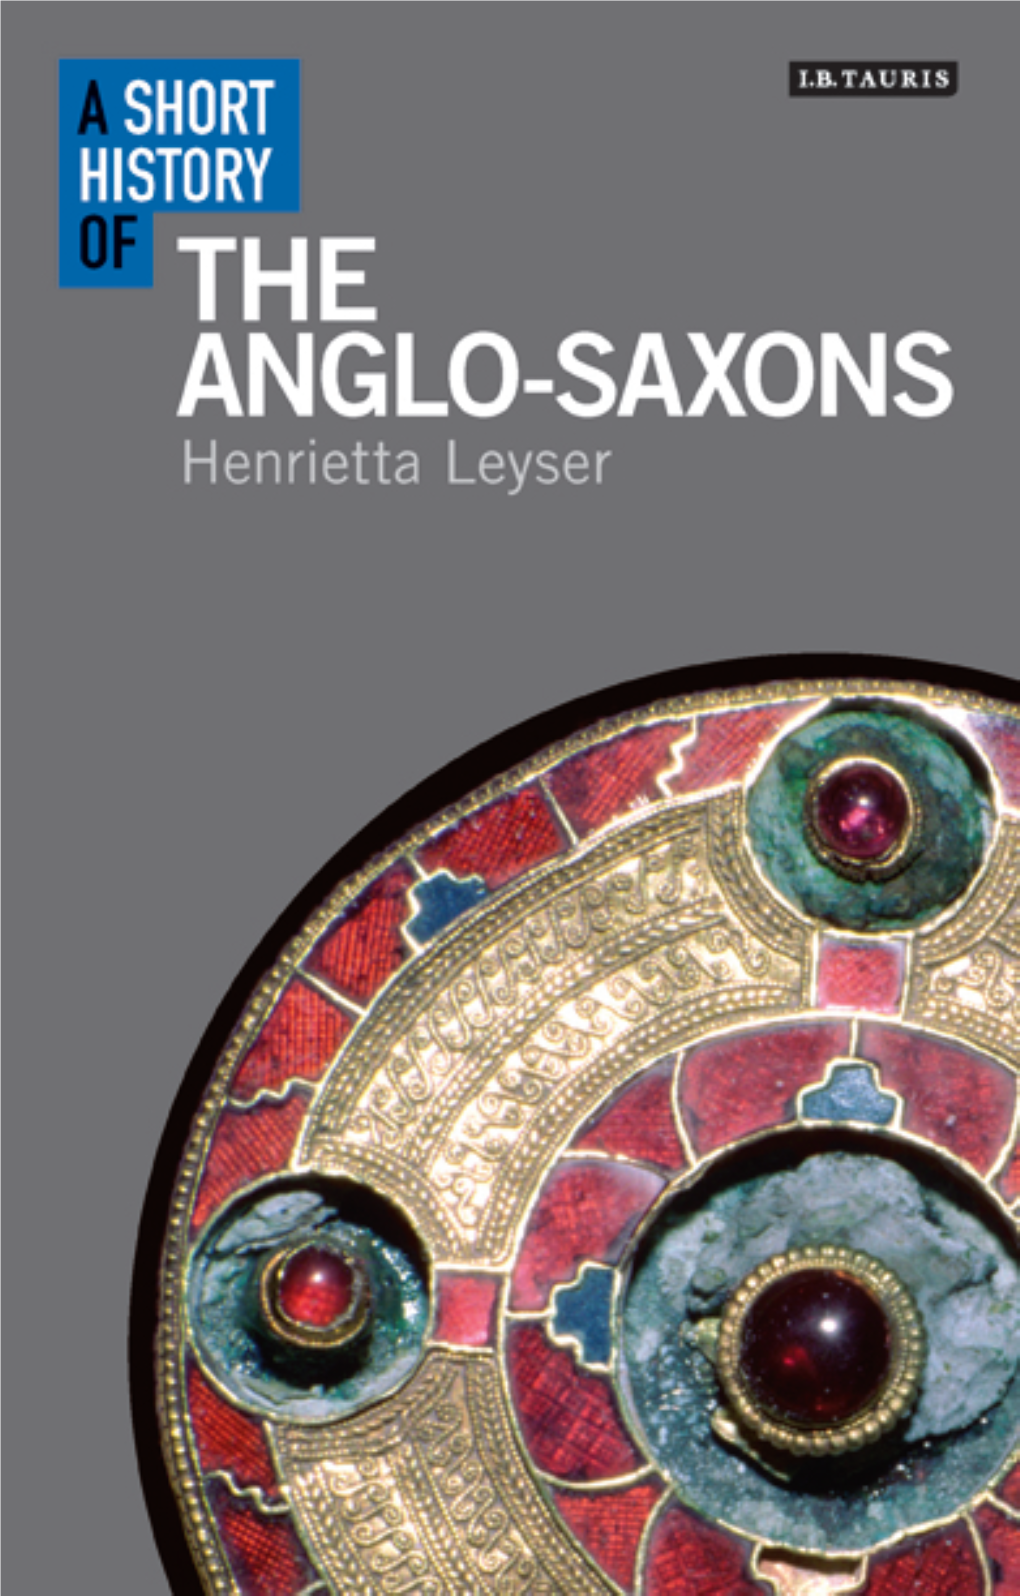 A Short History of the Anglo-Saxons Opens New Windows on a Distant Yet Very Present World at a Corner of Early Medieval Europe